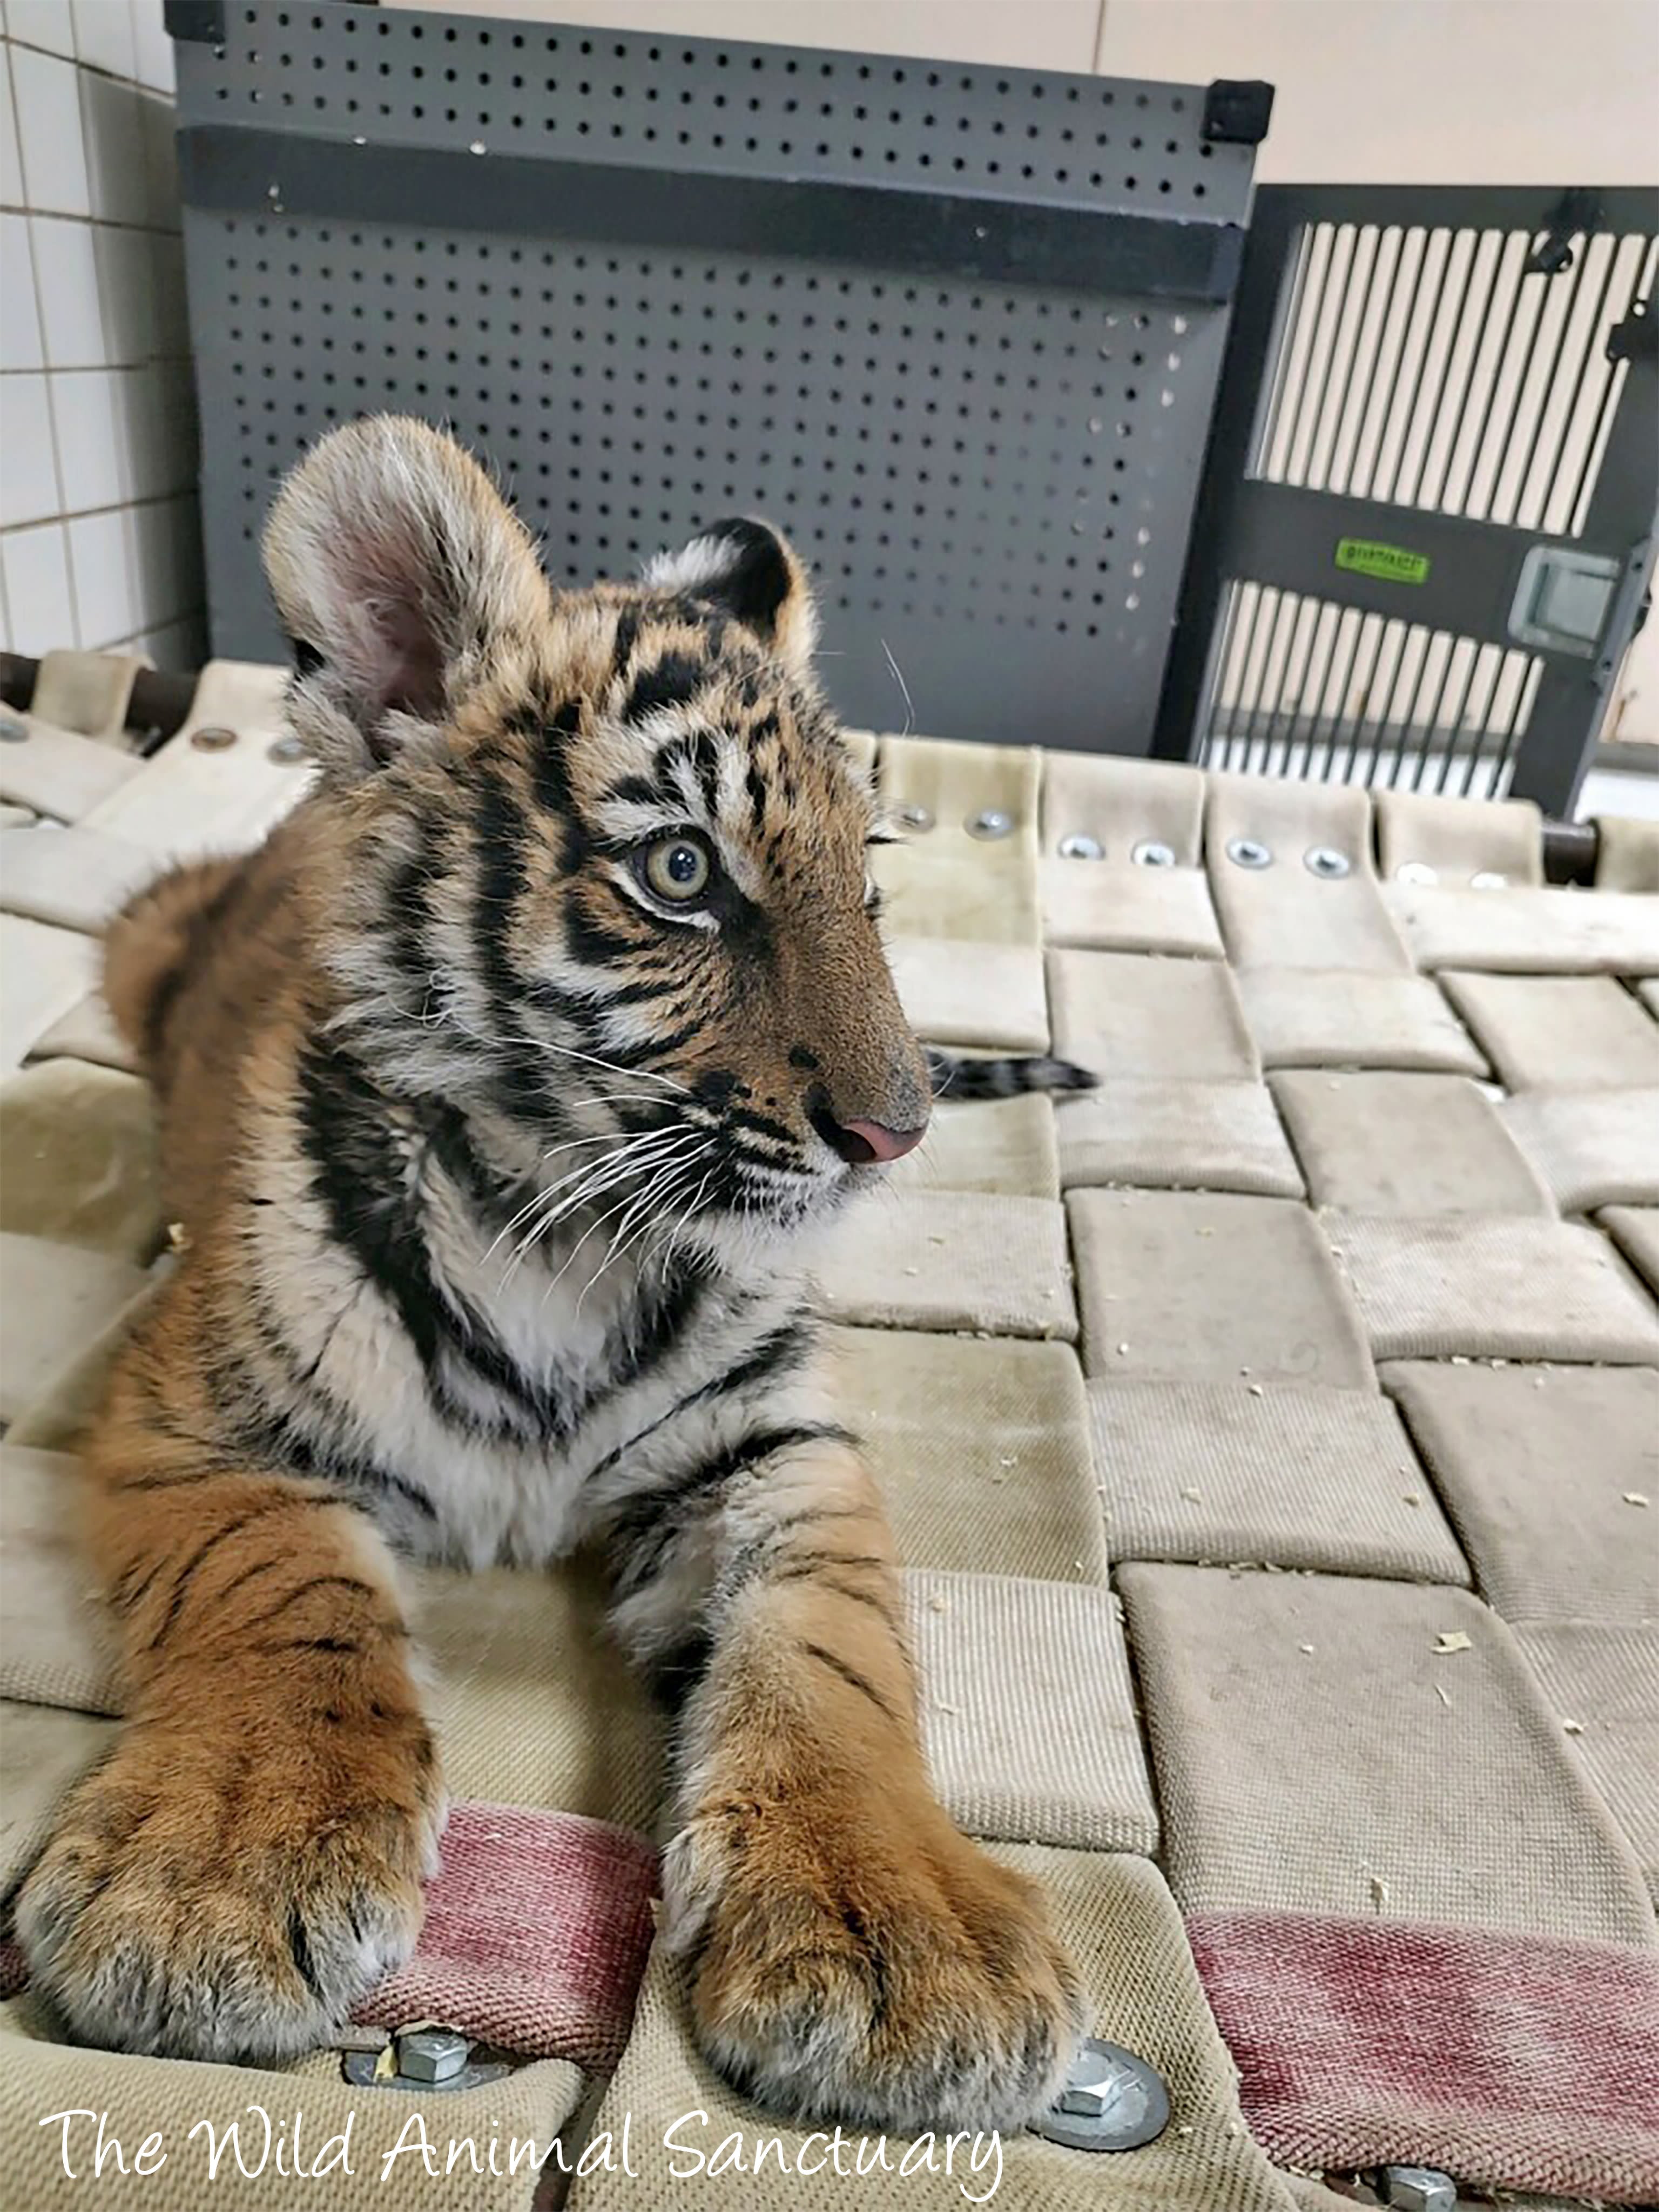 Bengal tiger cub recovered by police during shooting investigation finds  new home at Colorado animal sanctuary